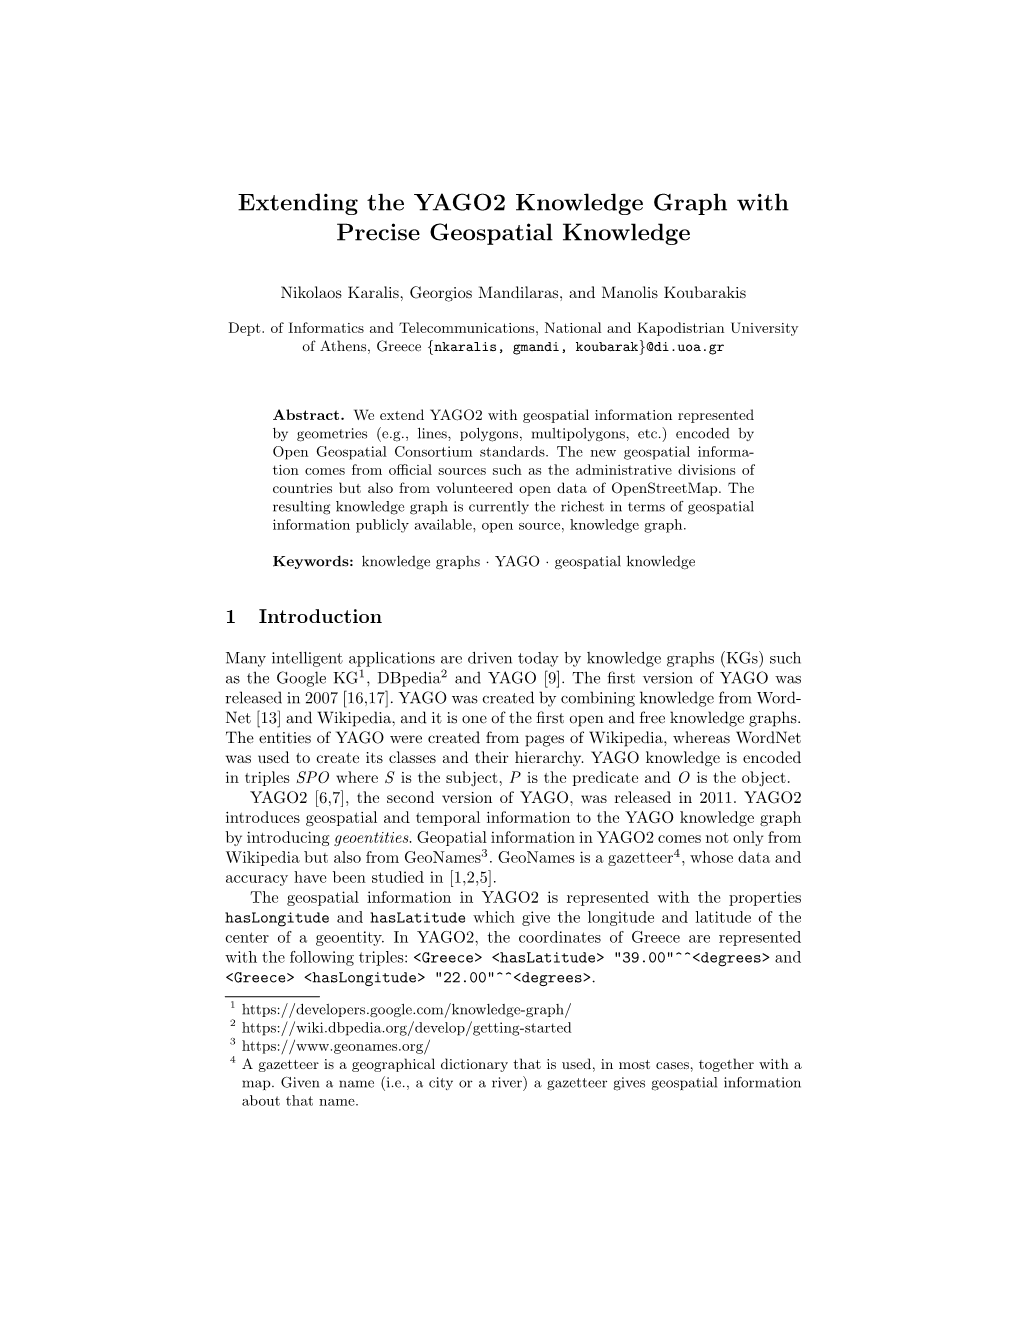 Extending the YAGO2 Knowledge Graph with Precise Geospatial Knowledge